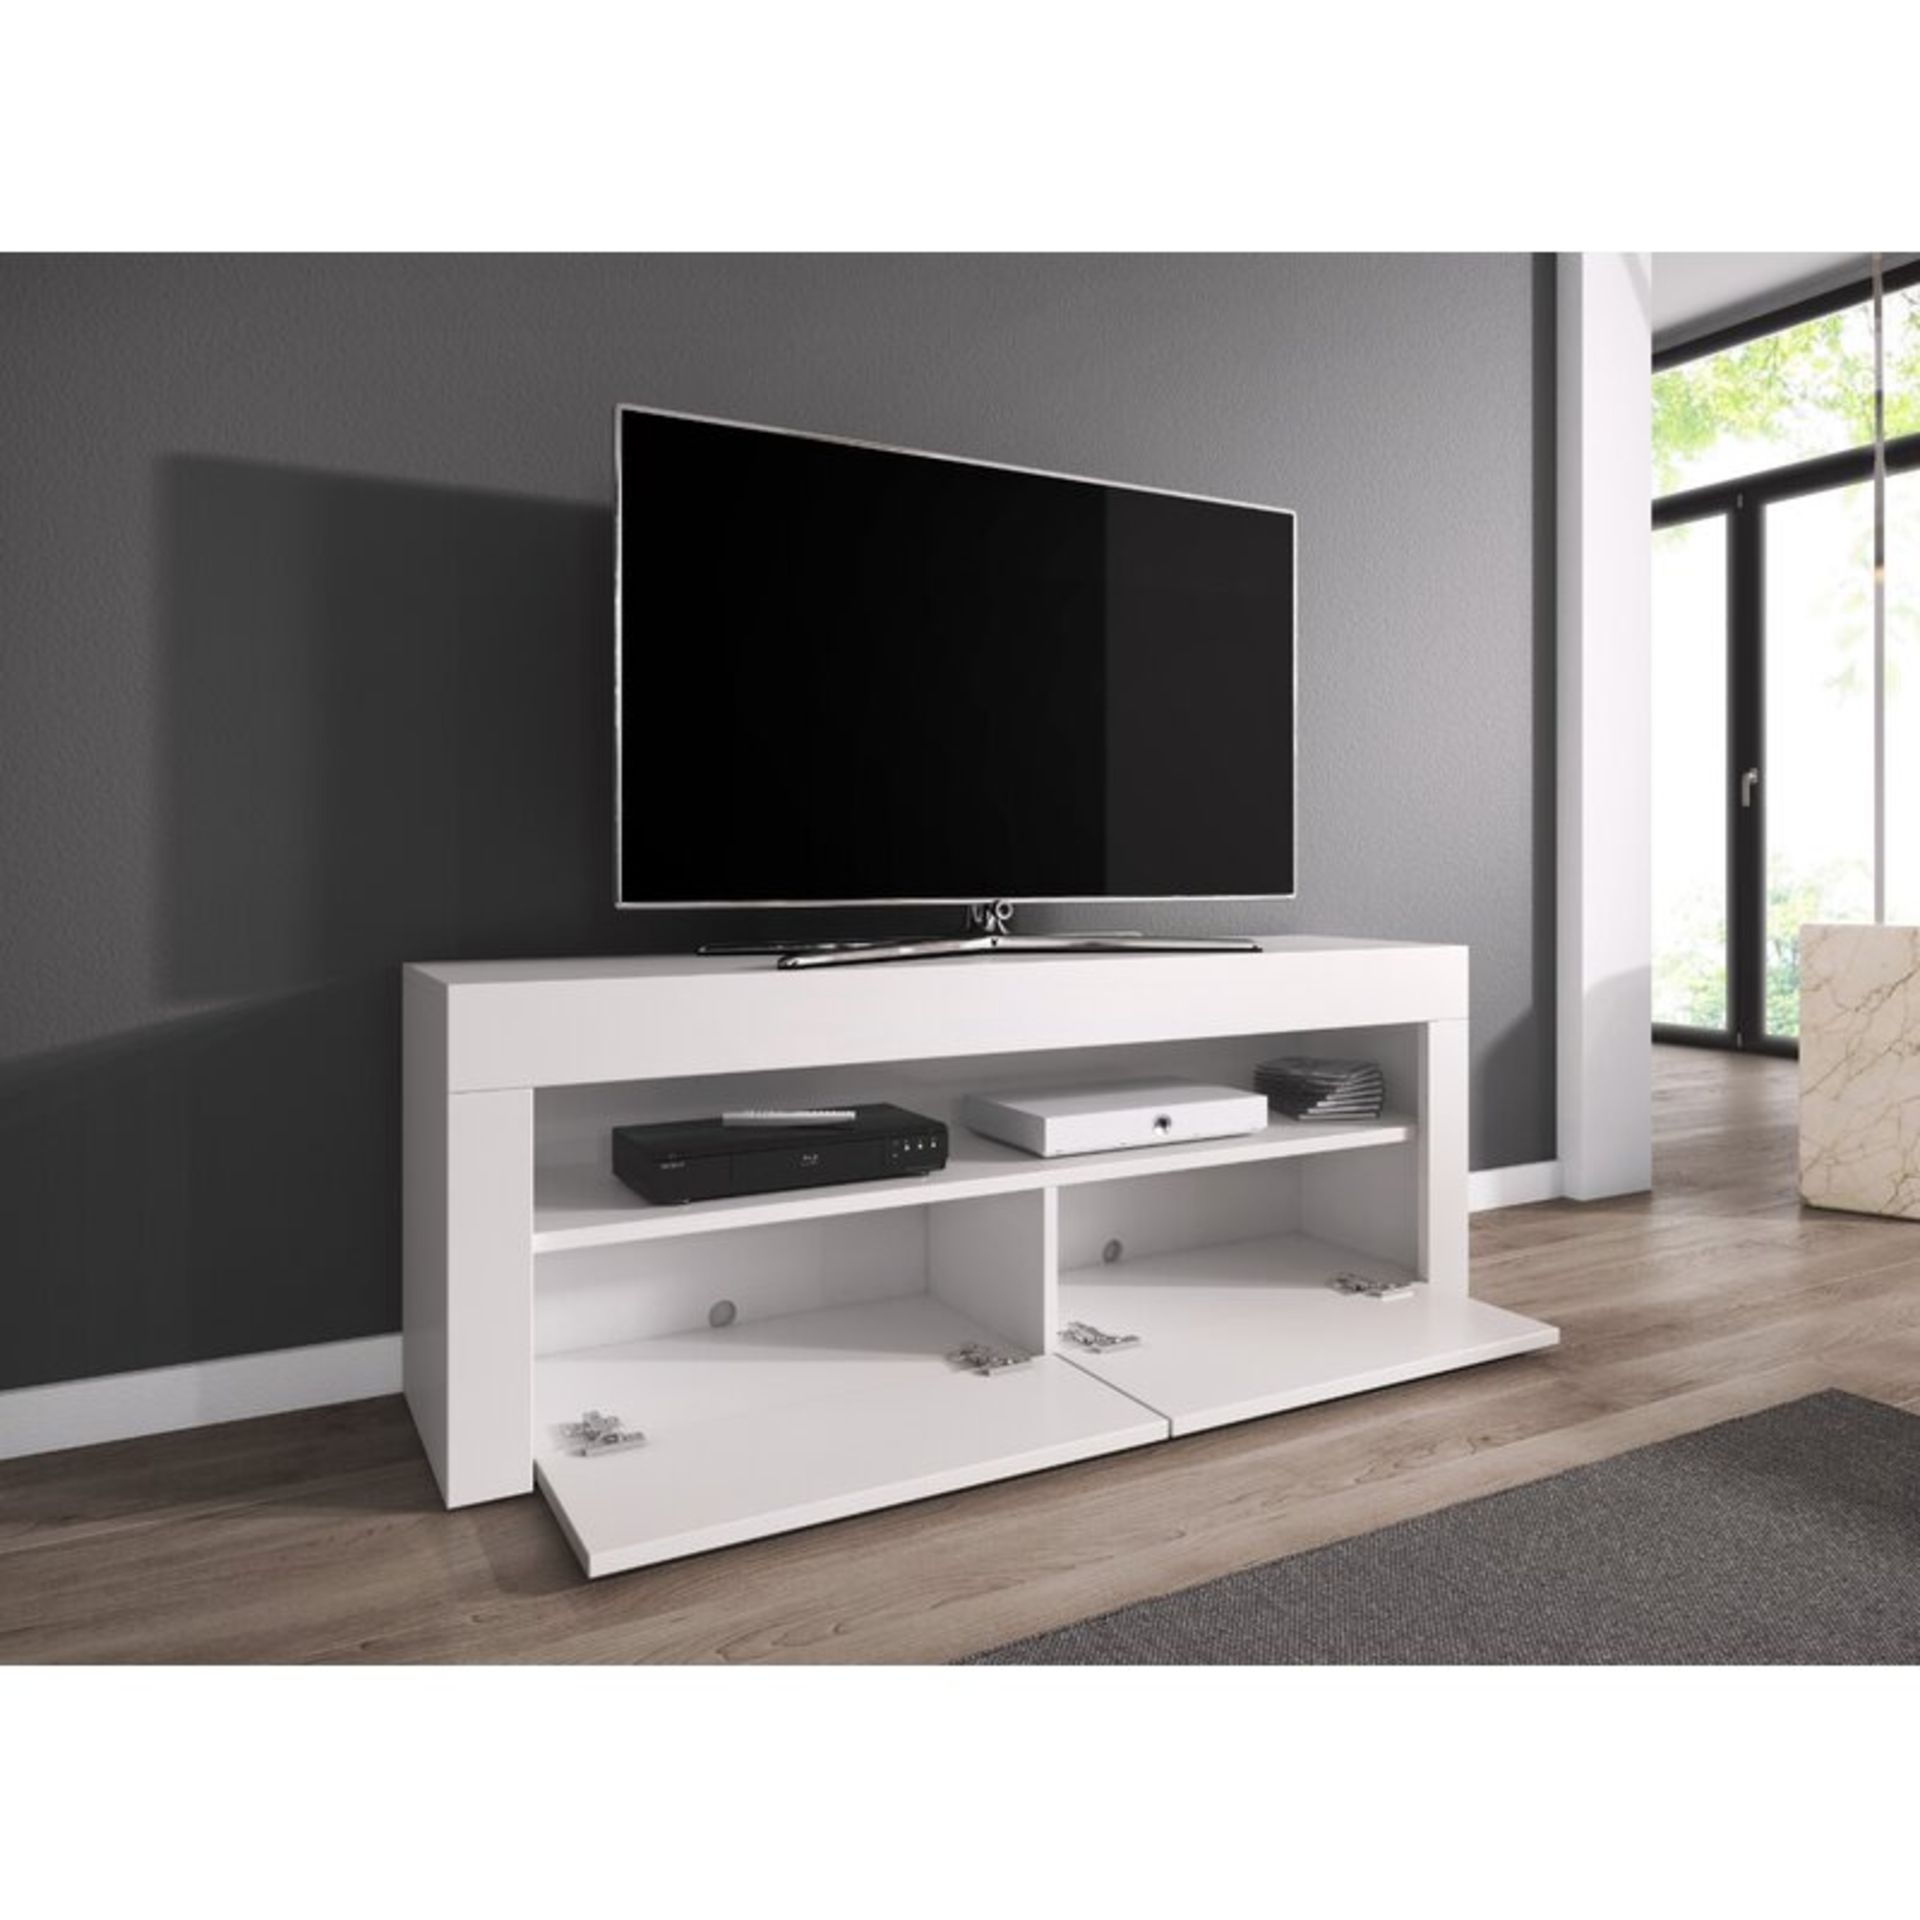 Hutchison TV Stand for TVs up to 55" White - RRP £196.99 - Image 2 of 3